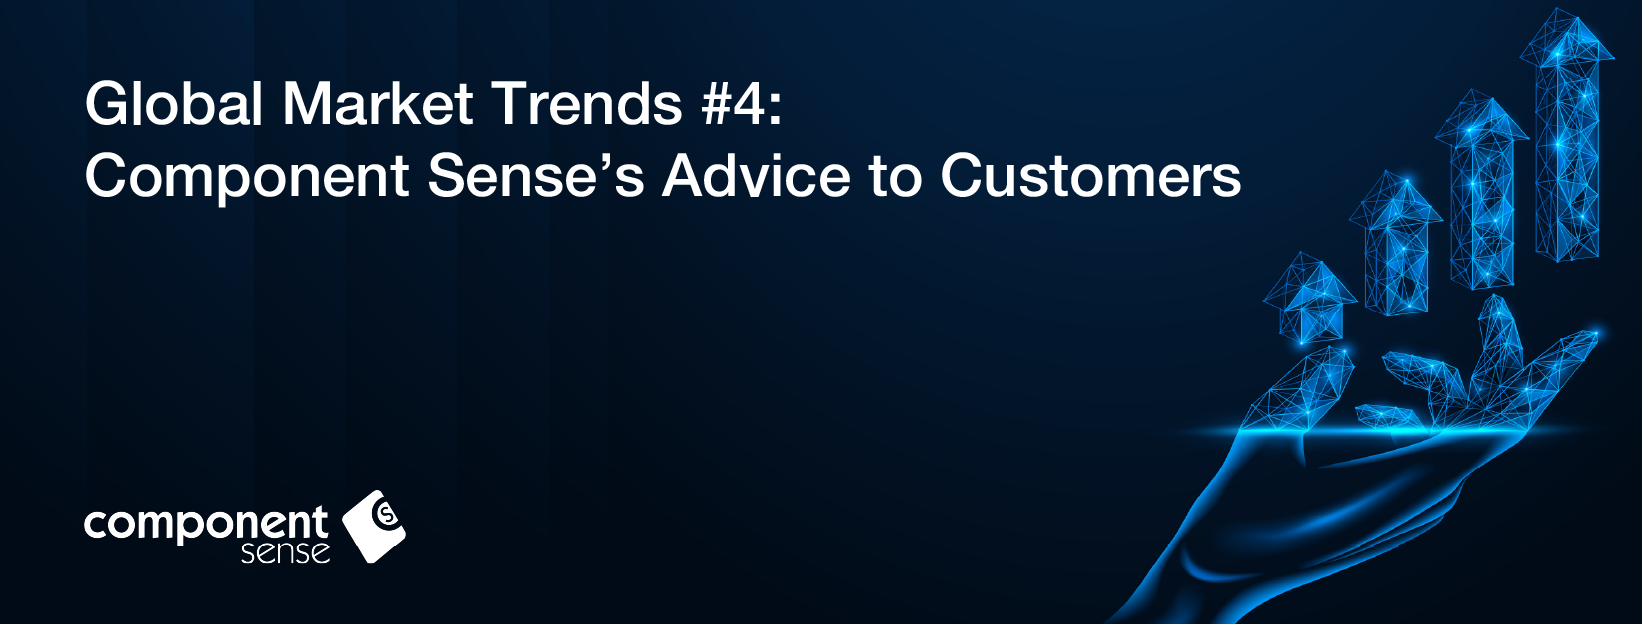 Global Market Trends #4: Component Sense's Advice to Customers